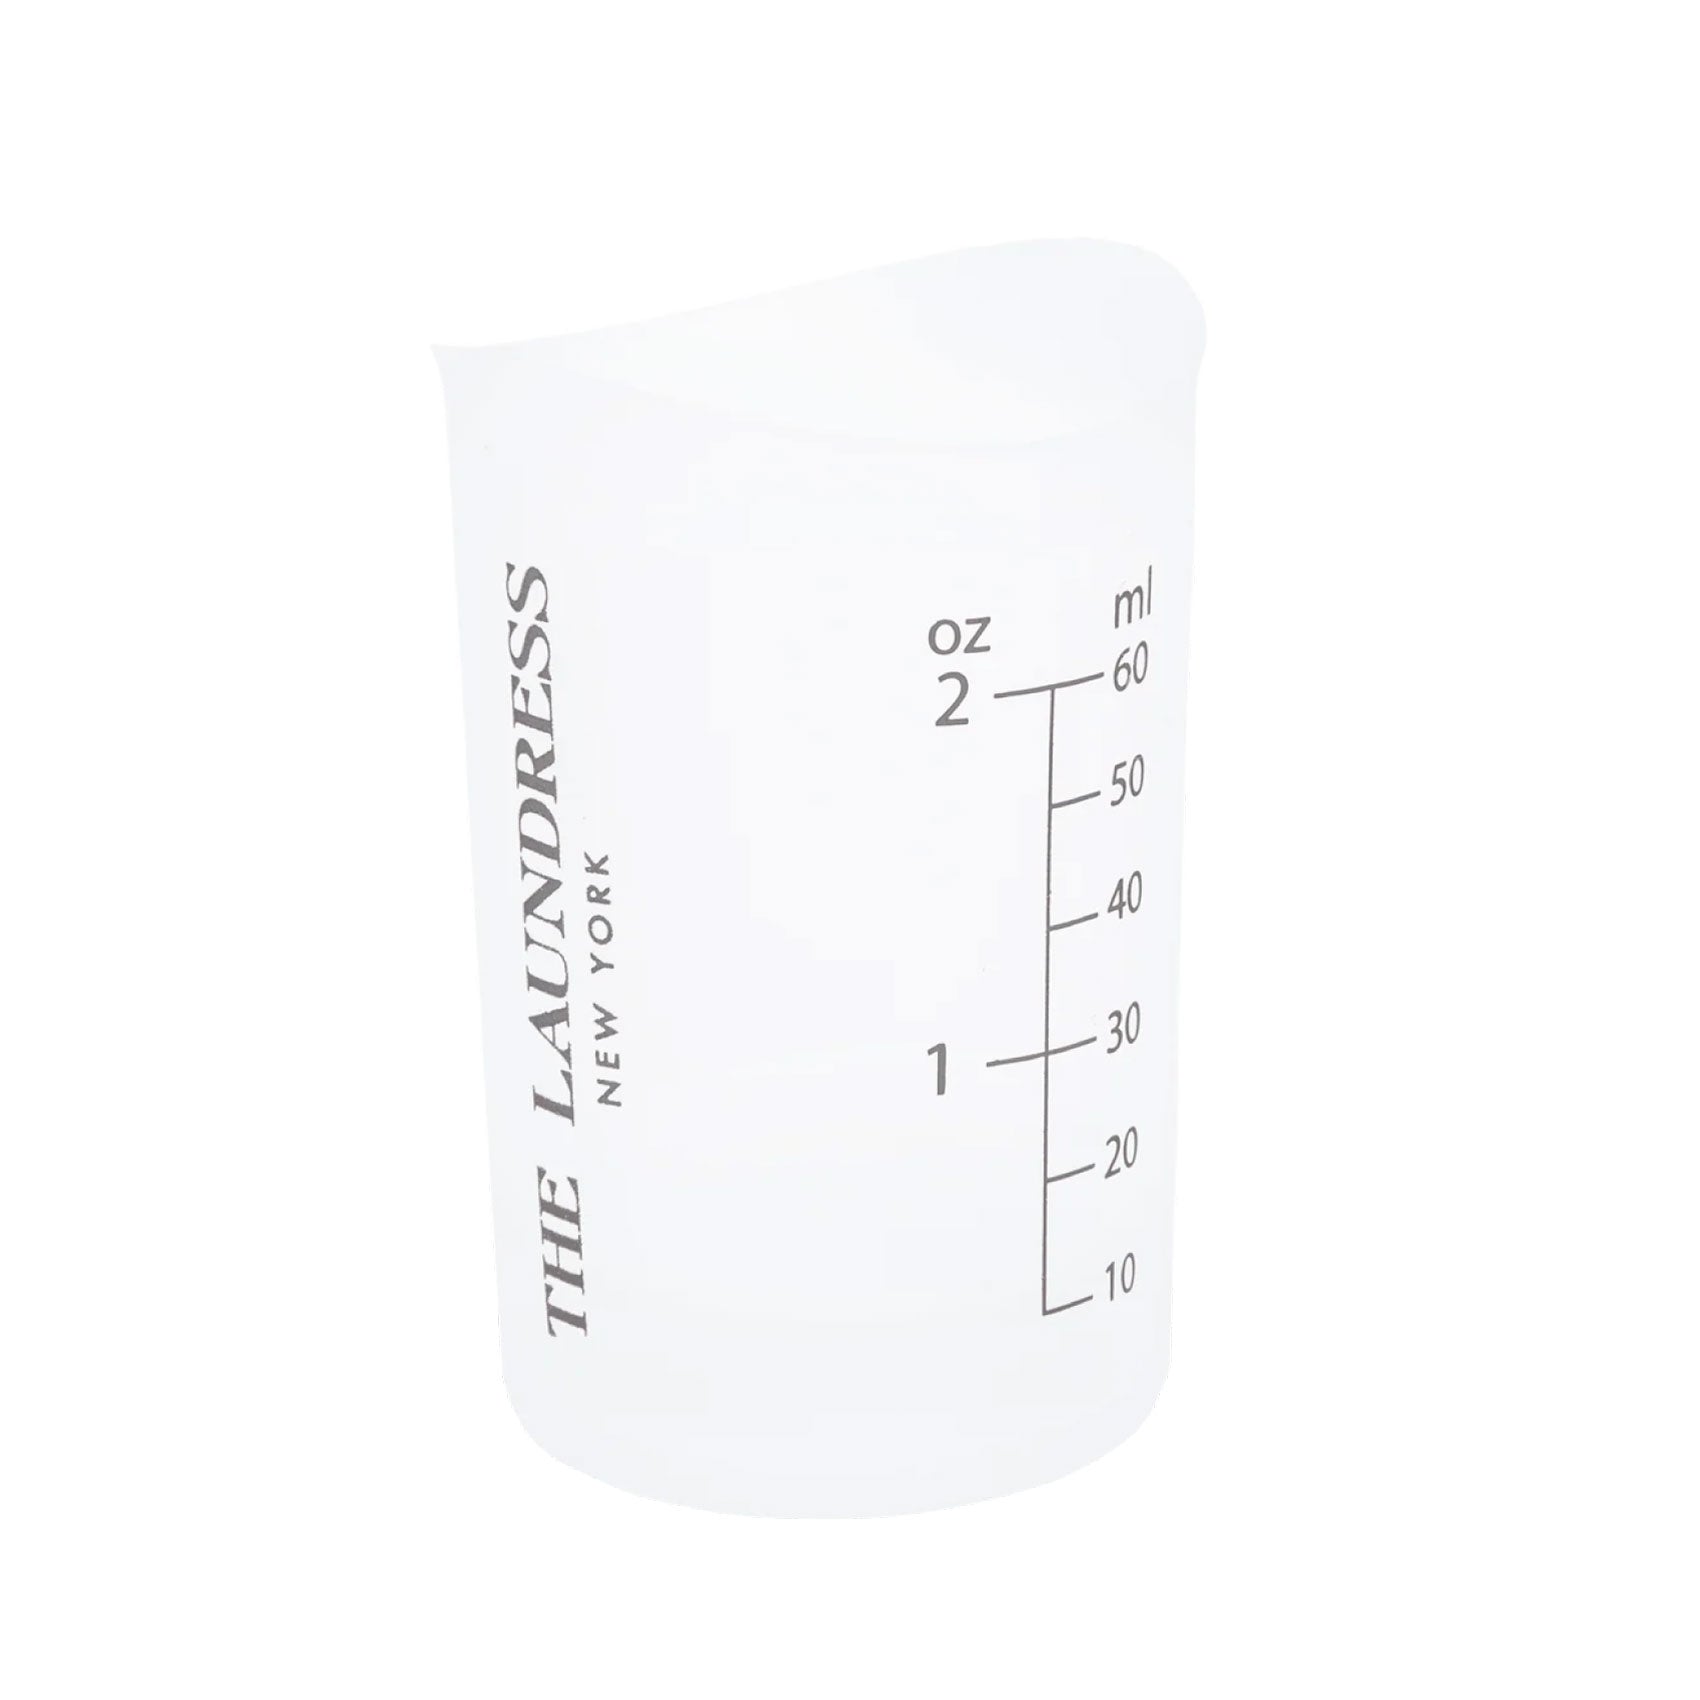 The Laundress 2 oz. Laundry Measuring Cup